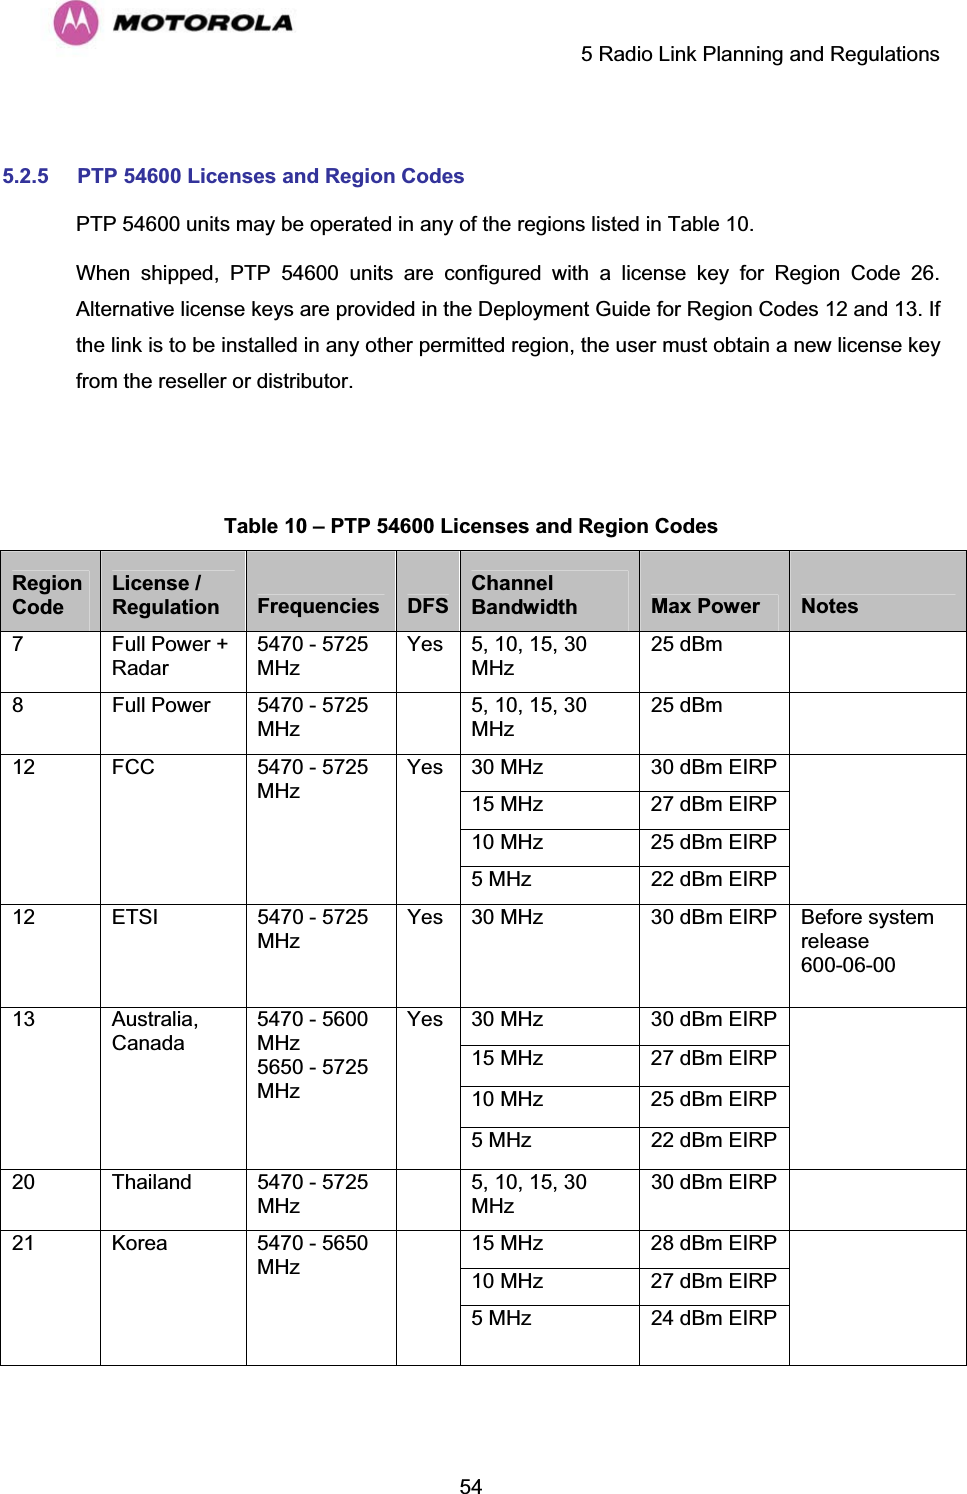     5 Radio Link Planning and Regulations  54 5.2.5 PTP 54600 Licenses and Region Codes PTP 54600 units may be operated in any of the regions listed in Table 10. When shipped, PTP 54600 units are configured with a license key for Region Code 26. Alternative license keys are provided in the Deployment Guide for Region Codes 12 and 13. If the link is to be installed in any other permitted region, the user must obtain a new license key from the reseller or distributor.   Table 10 – PTP 54600 Licenses and Region Codes RegionCodeLicense / Regulation  Frequencies  DFSChannel Bandwidth  Max Power  Notes7  Full Power + Radar 5470 - 5725 MHz Yes  5, 10, 15, 30 MHz 25 dBm    8  Full Power  5470 - 5725 MHz    5, 10, 15, 30 MHz 25 dBm    30 MHz  30 dBm EIRP 15 MHz  27 dBm EIRP 10 MHz  25 dBm EIRP 12   FCC 5470 - 5725 MHz Yes 5 MHz  22 dBm EIRP   12 ETSI  5470 - 5725 MHz Yes  30 MHz  30 dBm EIRP  Before system release  600-06-00 30 MHz   30 dBm EIRP 15 MHz  27 dBm EIRP 10 MHz  25 dBm EIRP 13   Australia, Canada   5470 - 5600 MHz 5650 - 5725 MHz Yes   5 MHz  22 dBm EIRP     20 Thailand 5470 - 5725 MHz    5, 10, 15, 30 MHz 30 dBm EIRP    15 MHz  28 dBm EIRP 10 MHz  27 dBm EIRP 21     Korea     5470 - 5650 MHz            5 MHz  24 dBm EIRP       